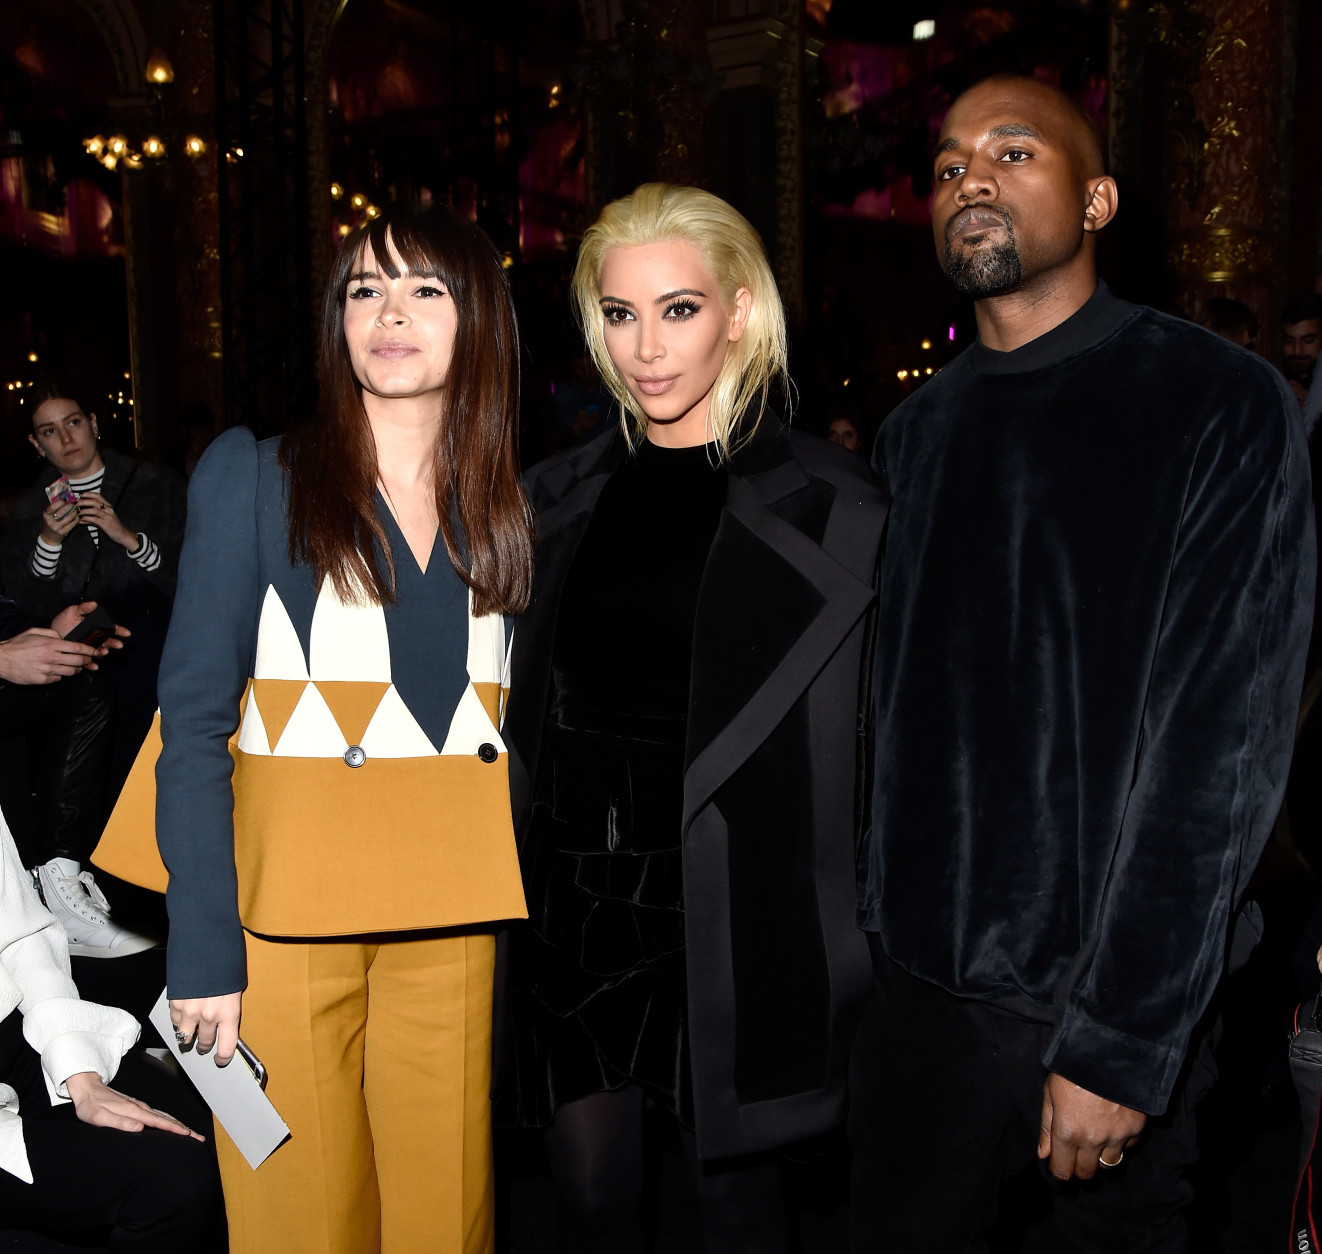 PARIS, FRANCE - MARCH 05:  (L-R) Miroslava Duma, Kim Kardashian and Kanye West attend the Balmain show as part of the Paris Fashion Week Womenswear Fall/Winter 2015/2016 on March 5, 2015 in Paris, France.  (Photo by Pascal Le Segretain/Getty Images)